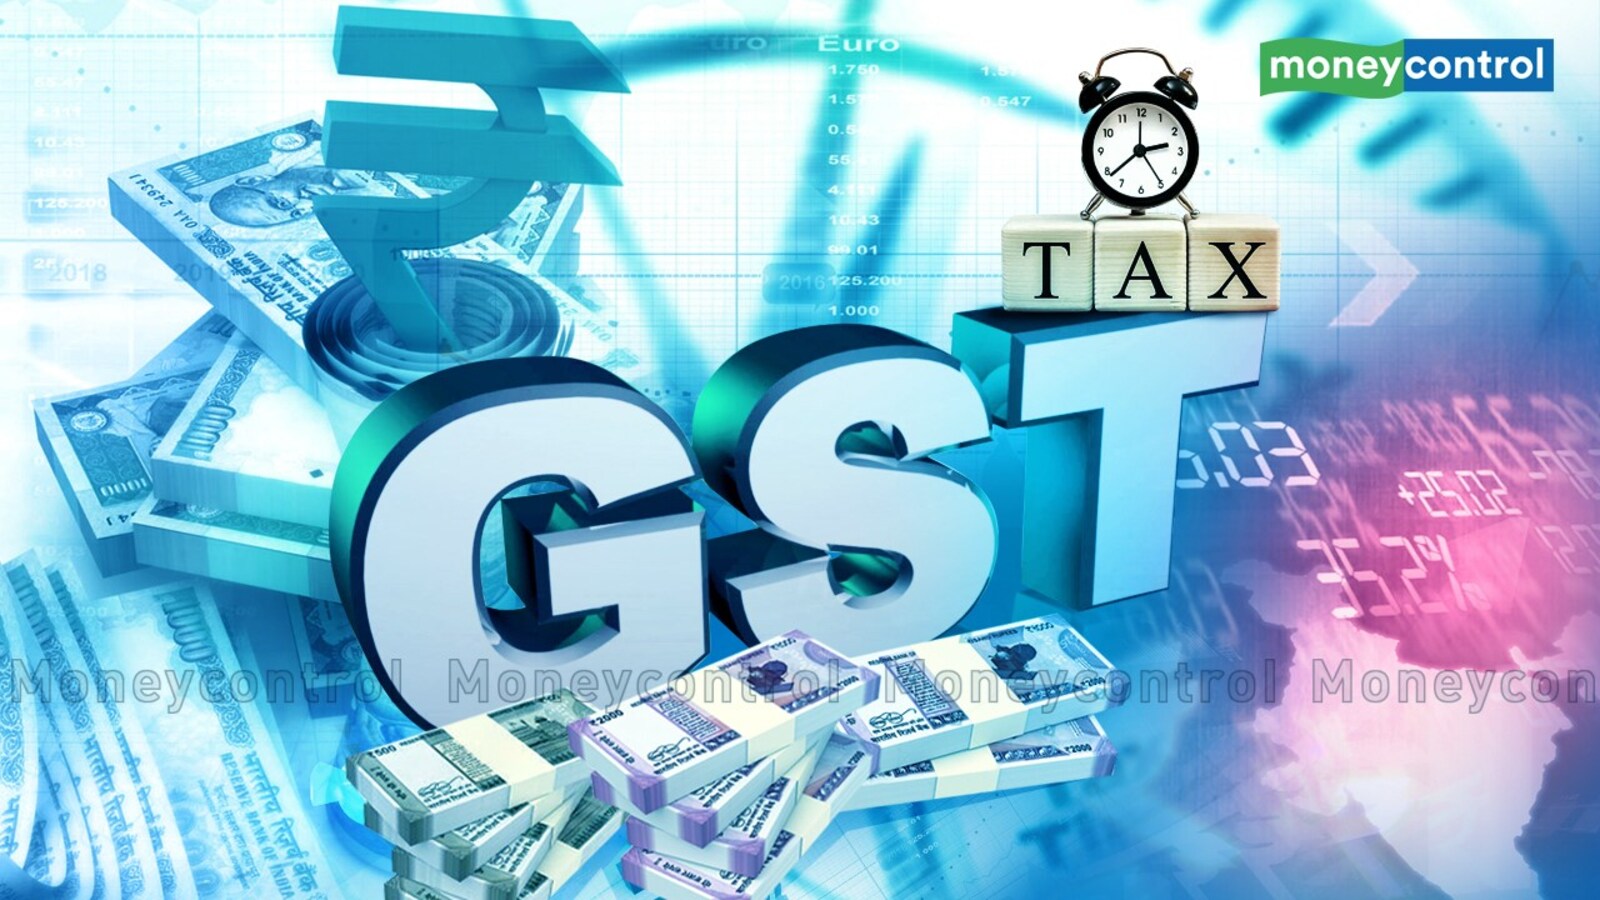 GST Council Meeting 2021 Highlights: Swiggy, Zomato to pay GST to govt